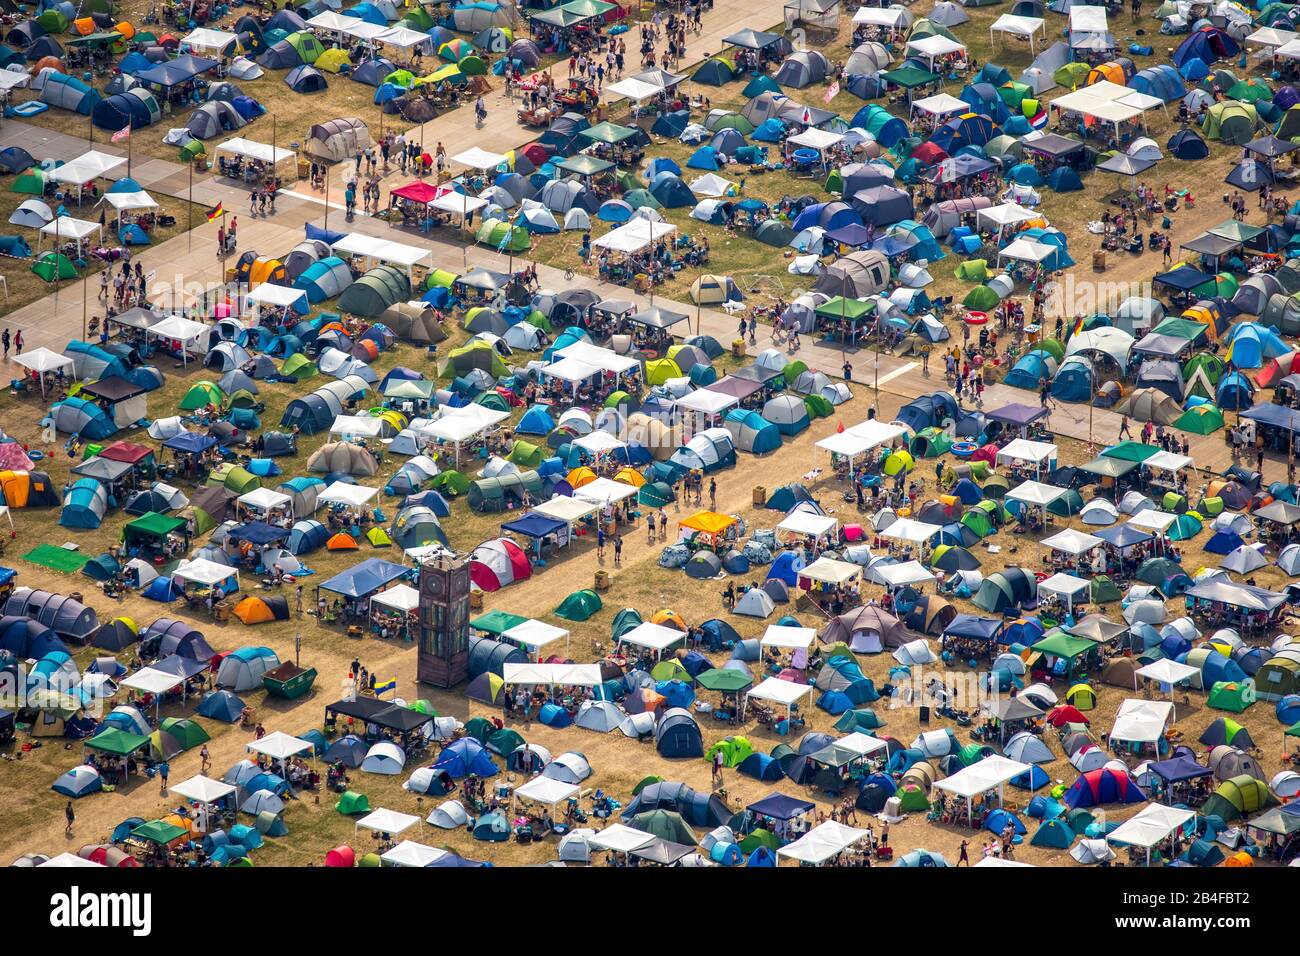 Aerial Festival ParookaVille 2019 at Weeze Airport, multi-day music festival in the field of electronic dance music in Weeze, Lower Rhine, North Rhine-Westphalia, Germany Stock Photo